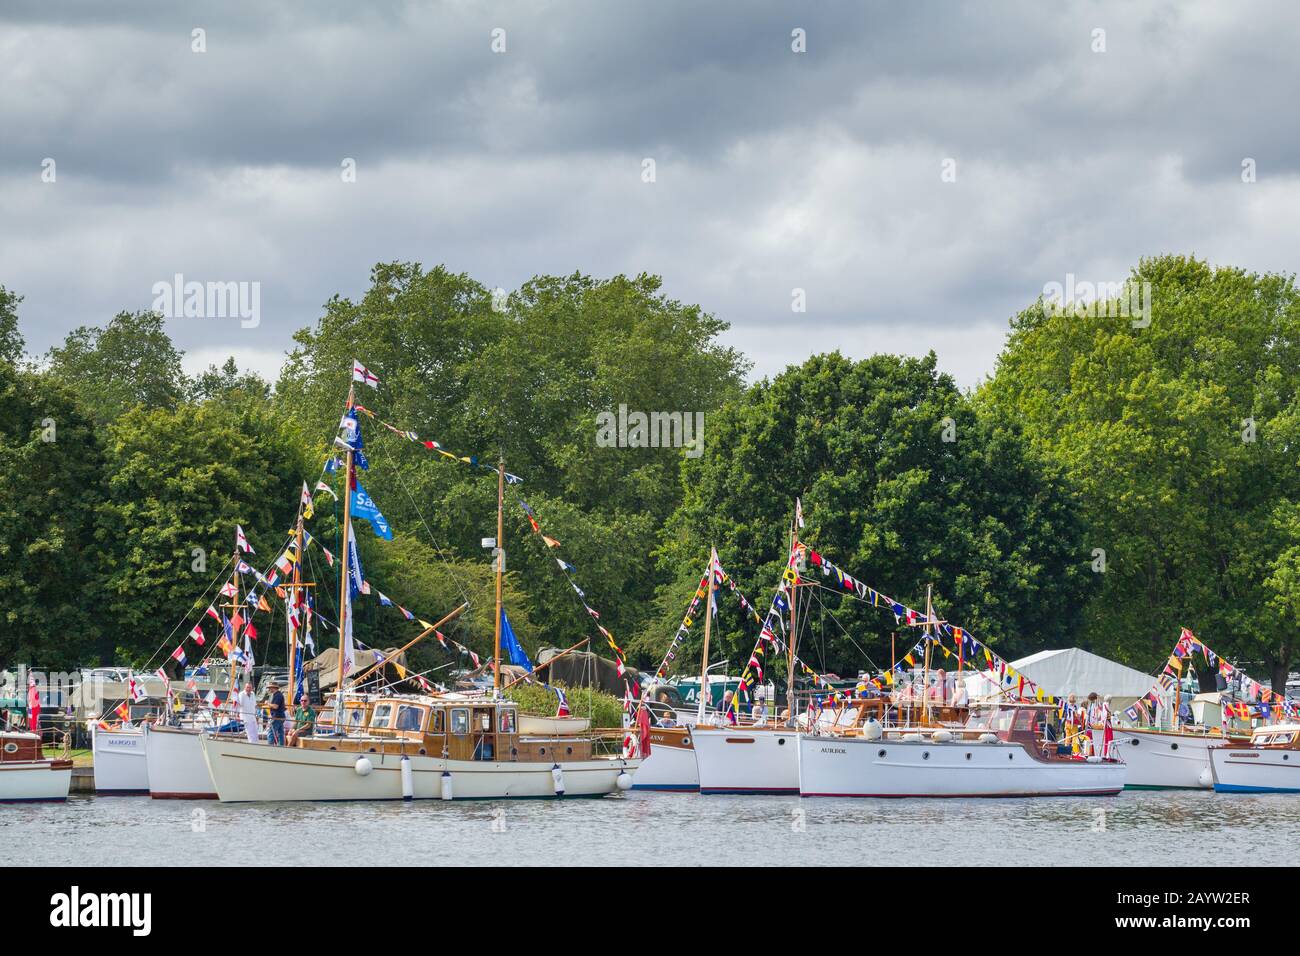 The classic Dunkirk Little Ships moored on the Thames near Henley-on-Thames at the Thames Traditional Boat Festival with bunting and flags and trees b Stock Photo